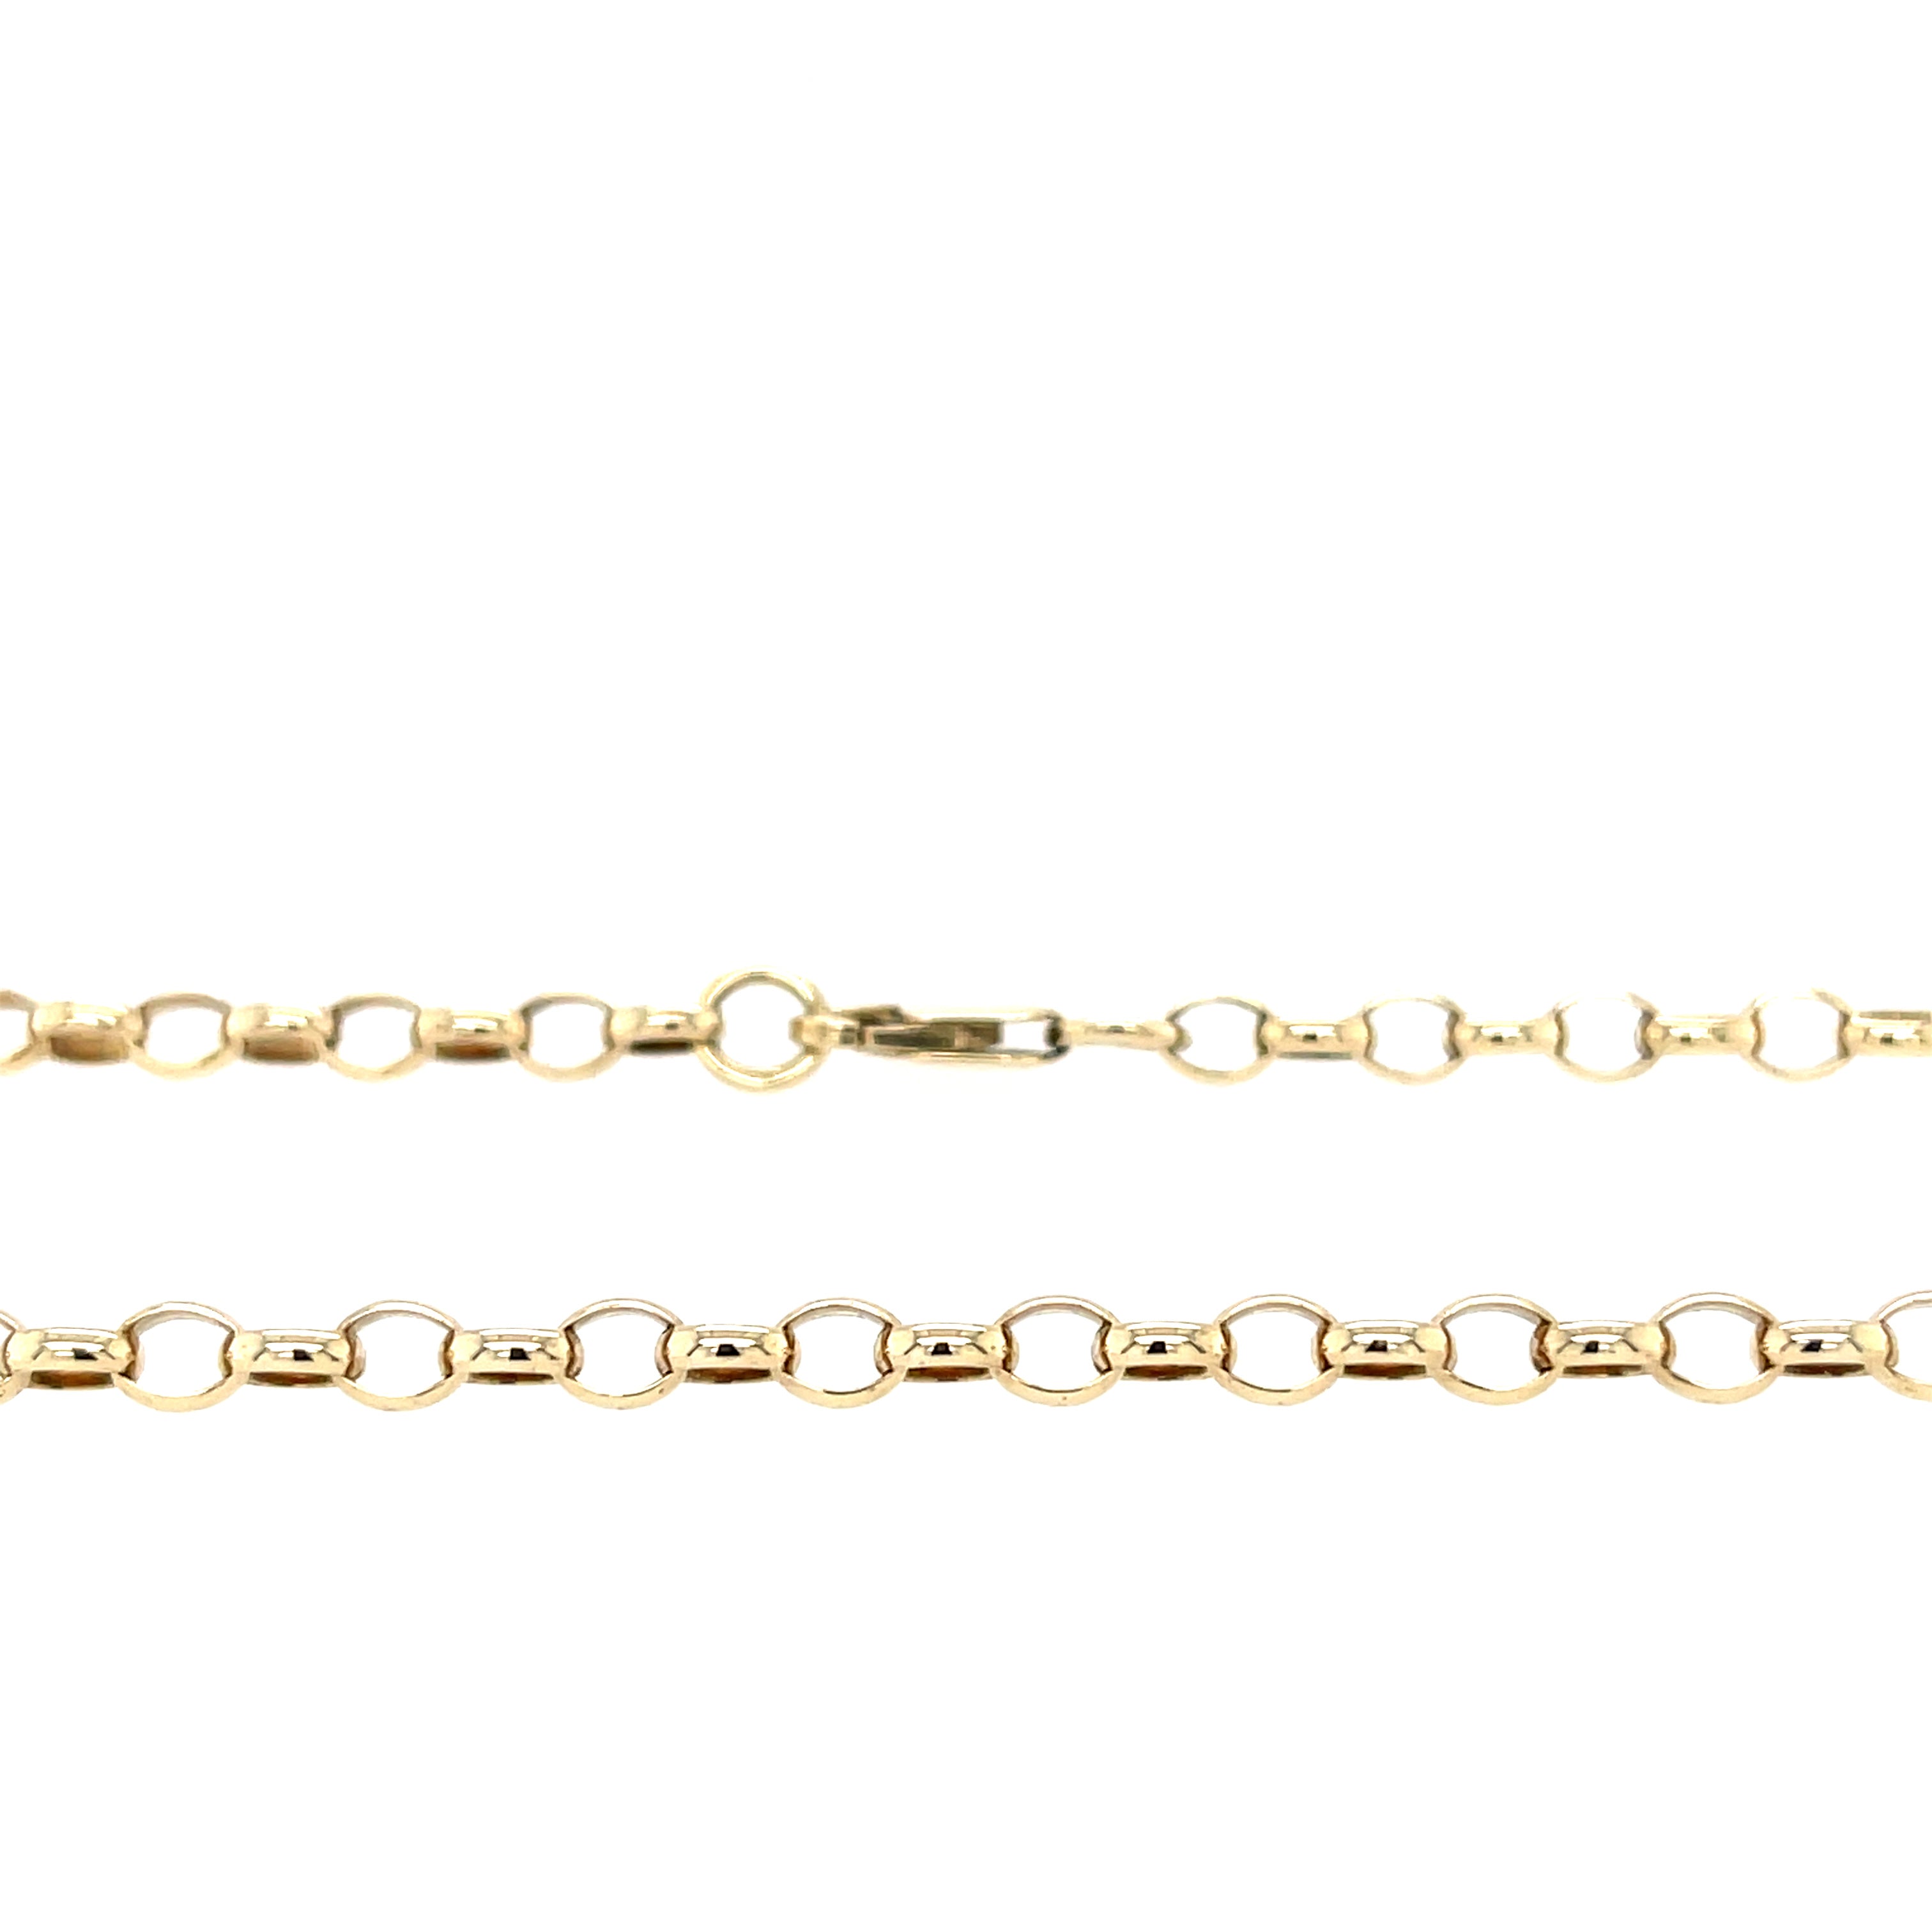 9ct Yellow Gold 21 Inch Oval Link Belcher Chain - 9.52g